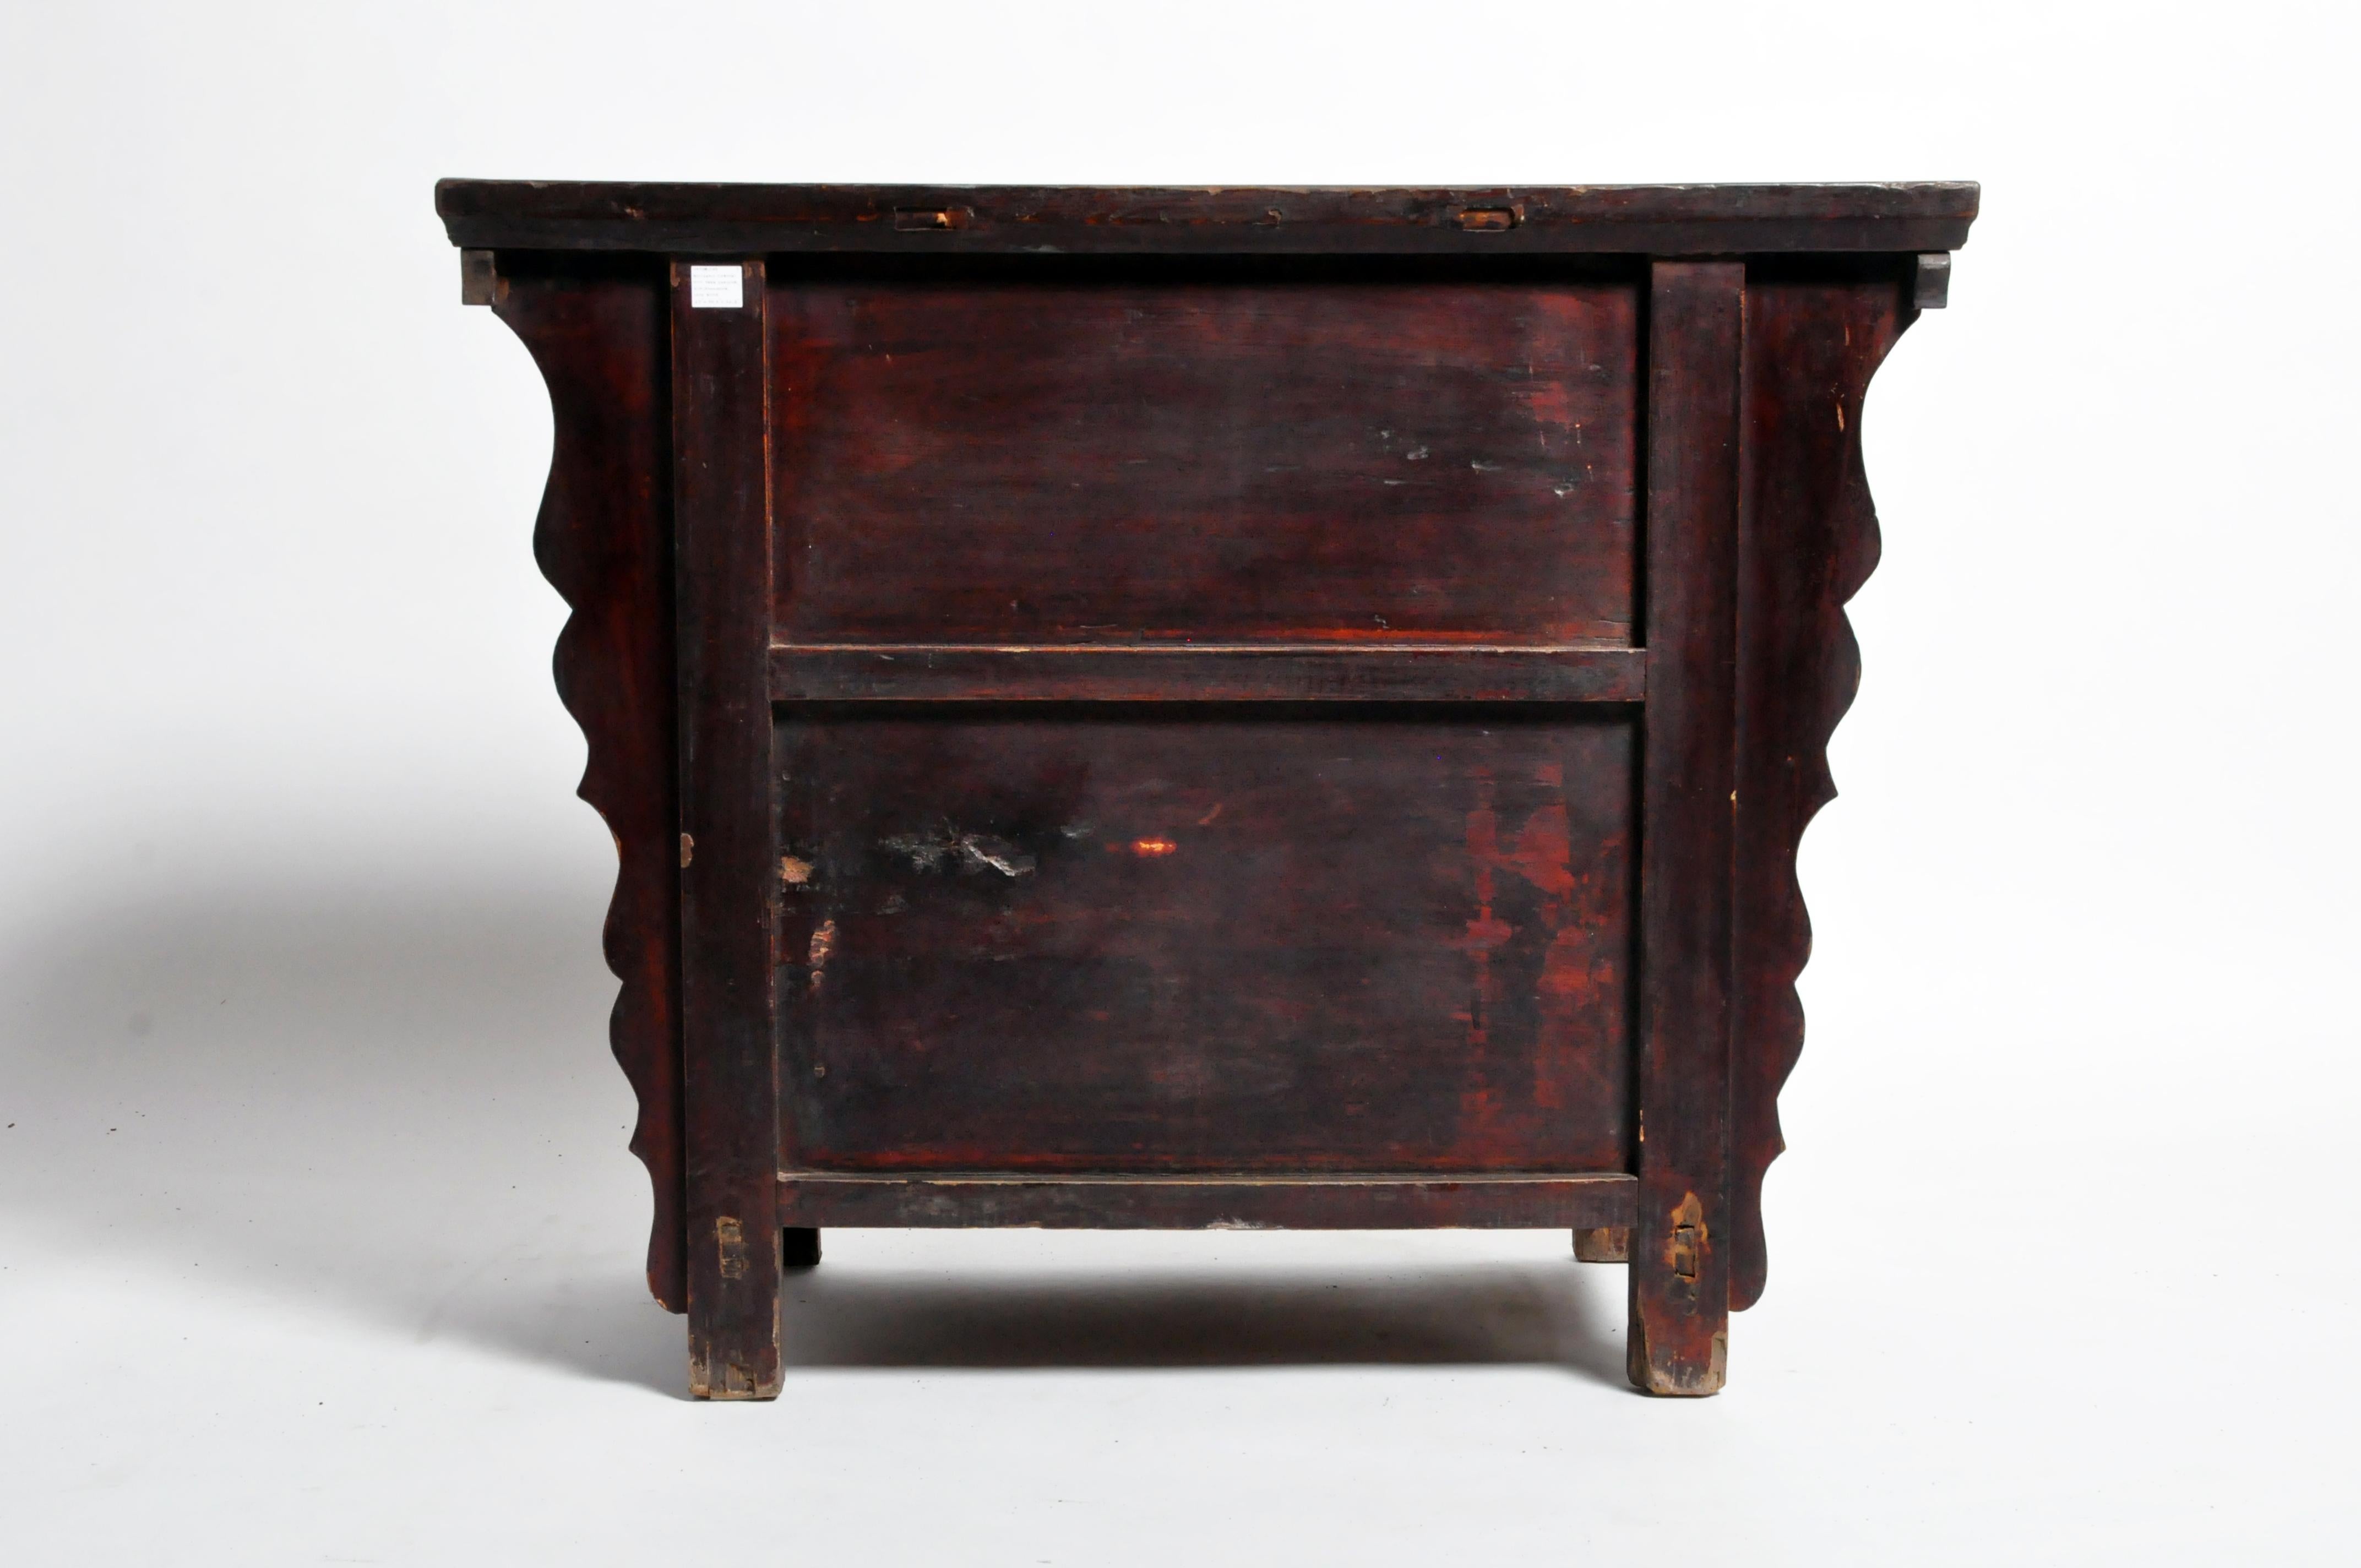 This Qing dynasty butterfly cabinet is from Shandong, China and was made from elmwood and lacquer, circa 19th century. The piece features 2 drawers, a pair of doors, and its original patina. Wear consistent with age and use.